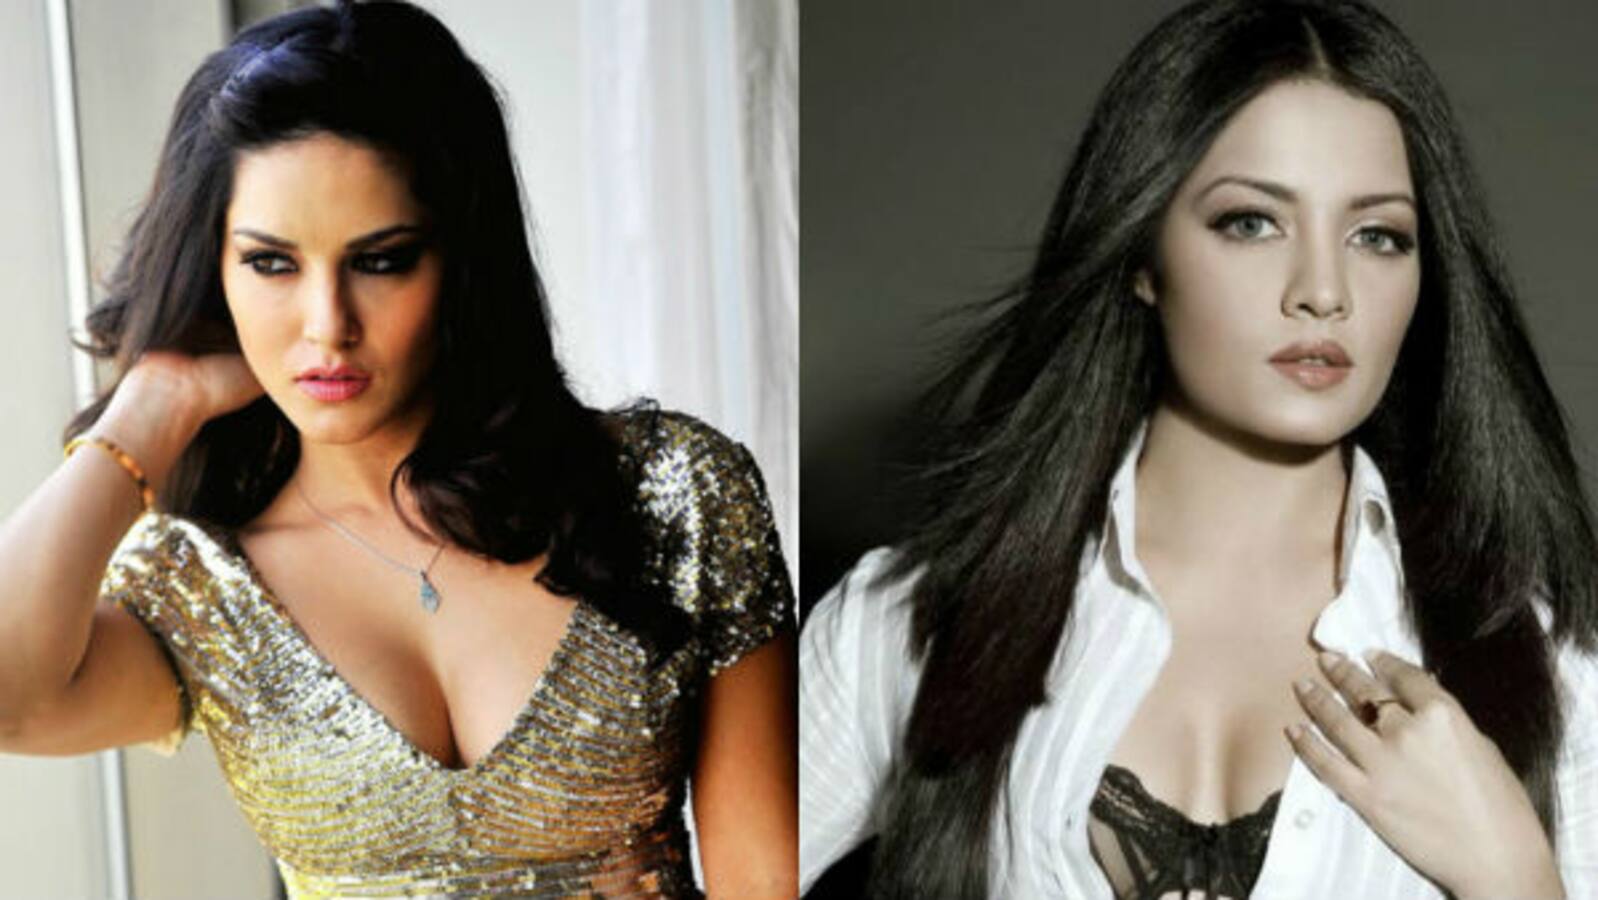 Celina Jaitly reacts to her rival Sunny Leone's condom ad and Atul Kumar Anjan's rape comment- find out what she has to say!